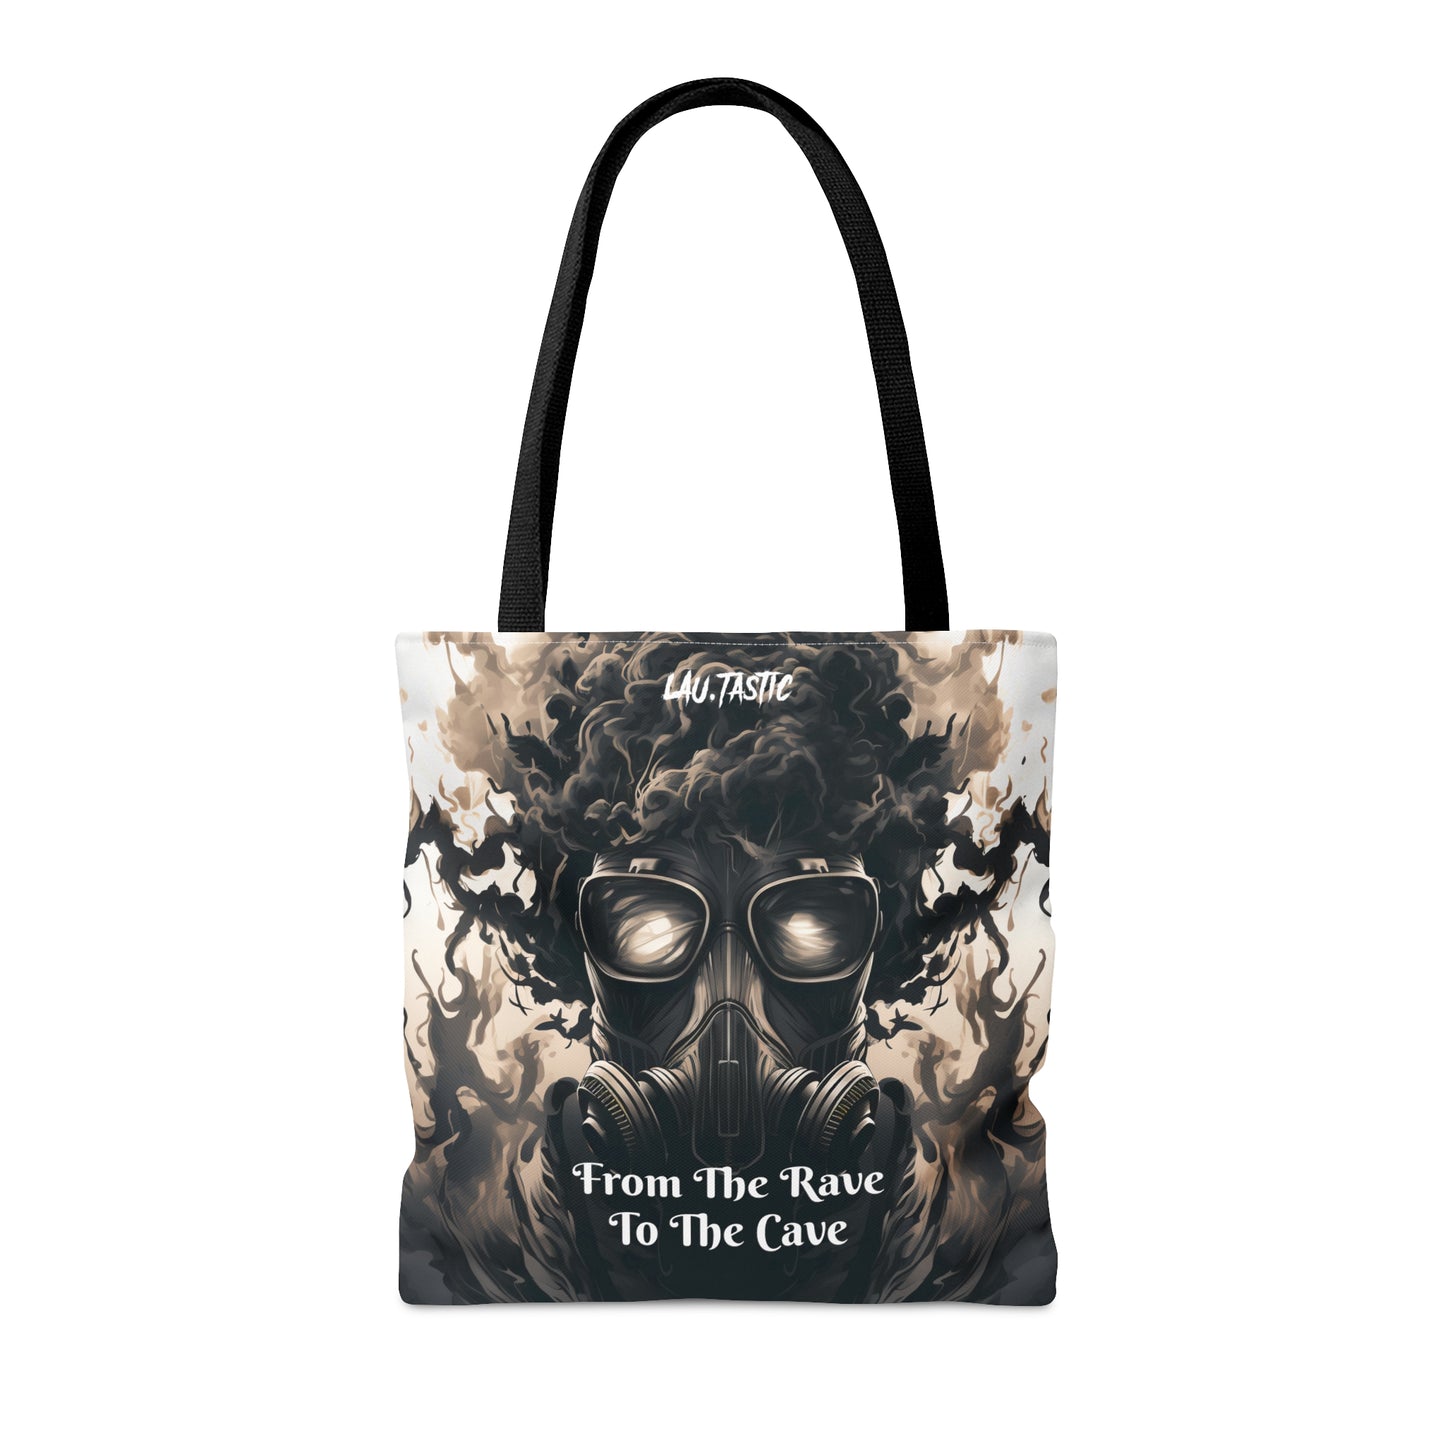 LAU.TASTIC | From The Rave To The Cave -  Tote Bag